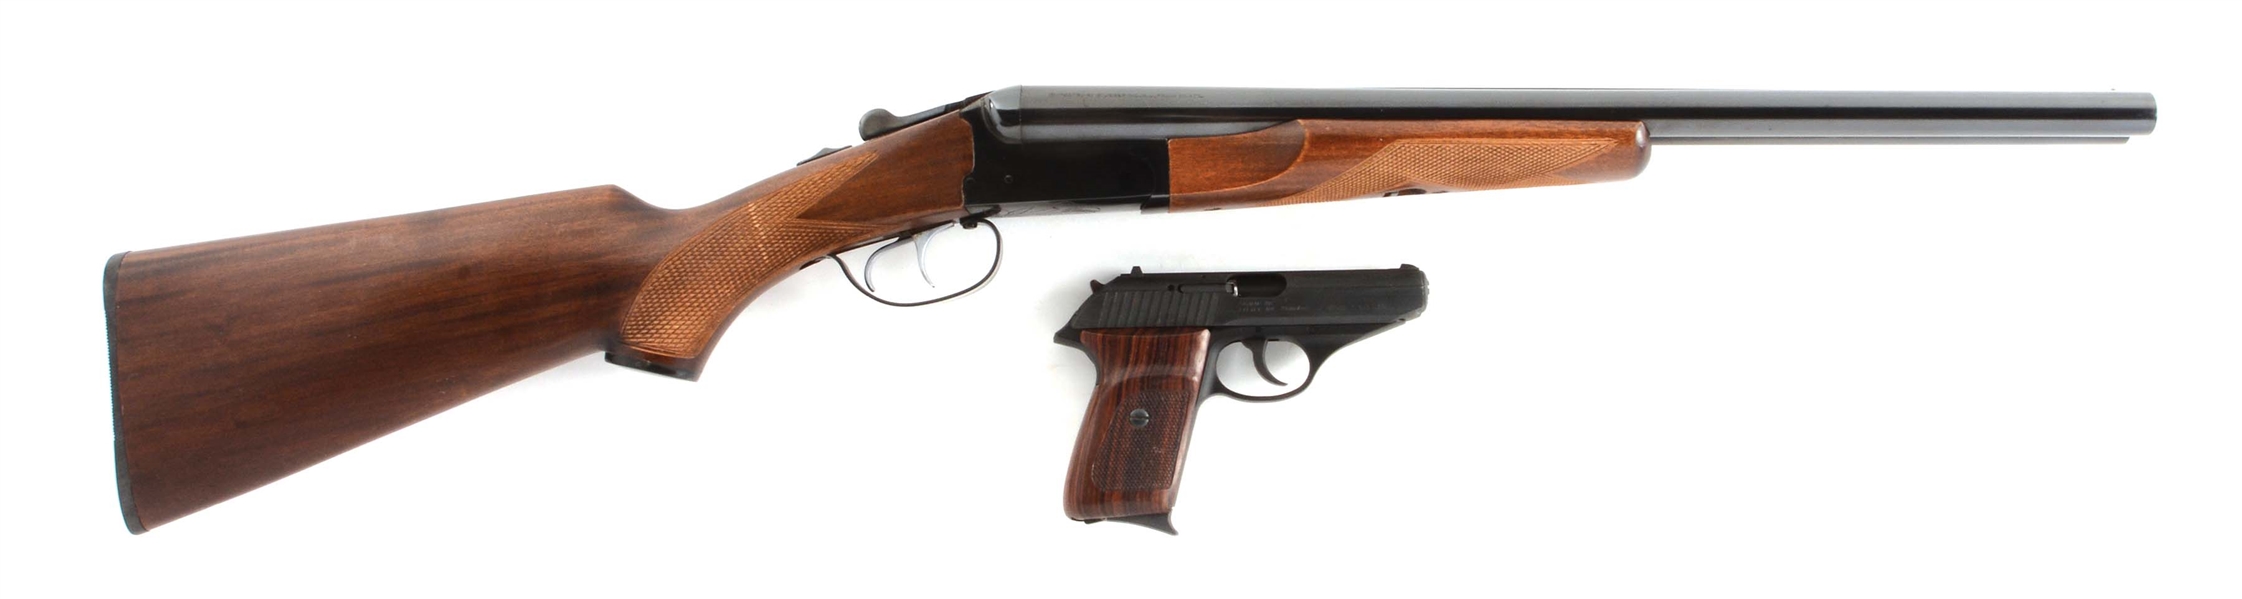 (M) LOT OF 2: (A) STOEGER COACHGUN SIDE BY SIDE SHOTGUN AND (B) SIG SAUER P230 SEMI-AUTOMATIC PISTOL.